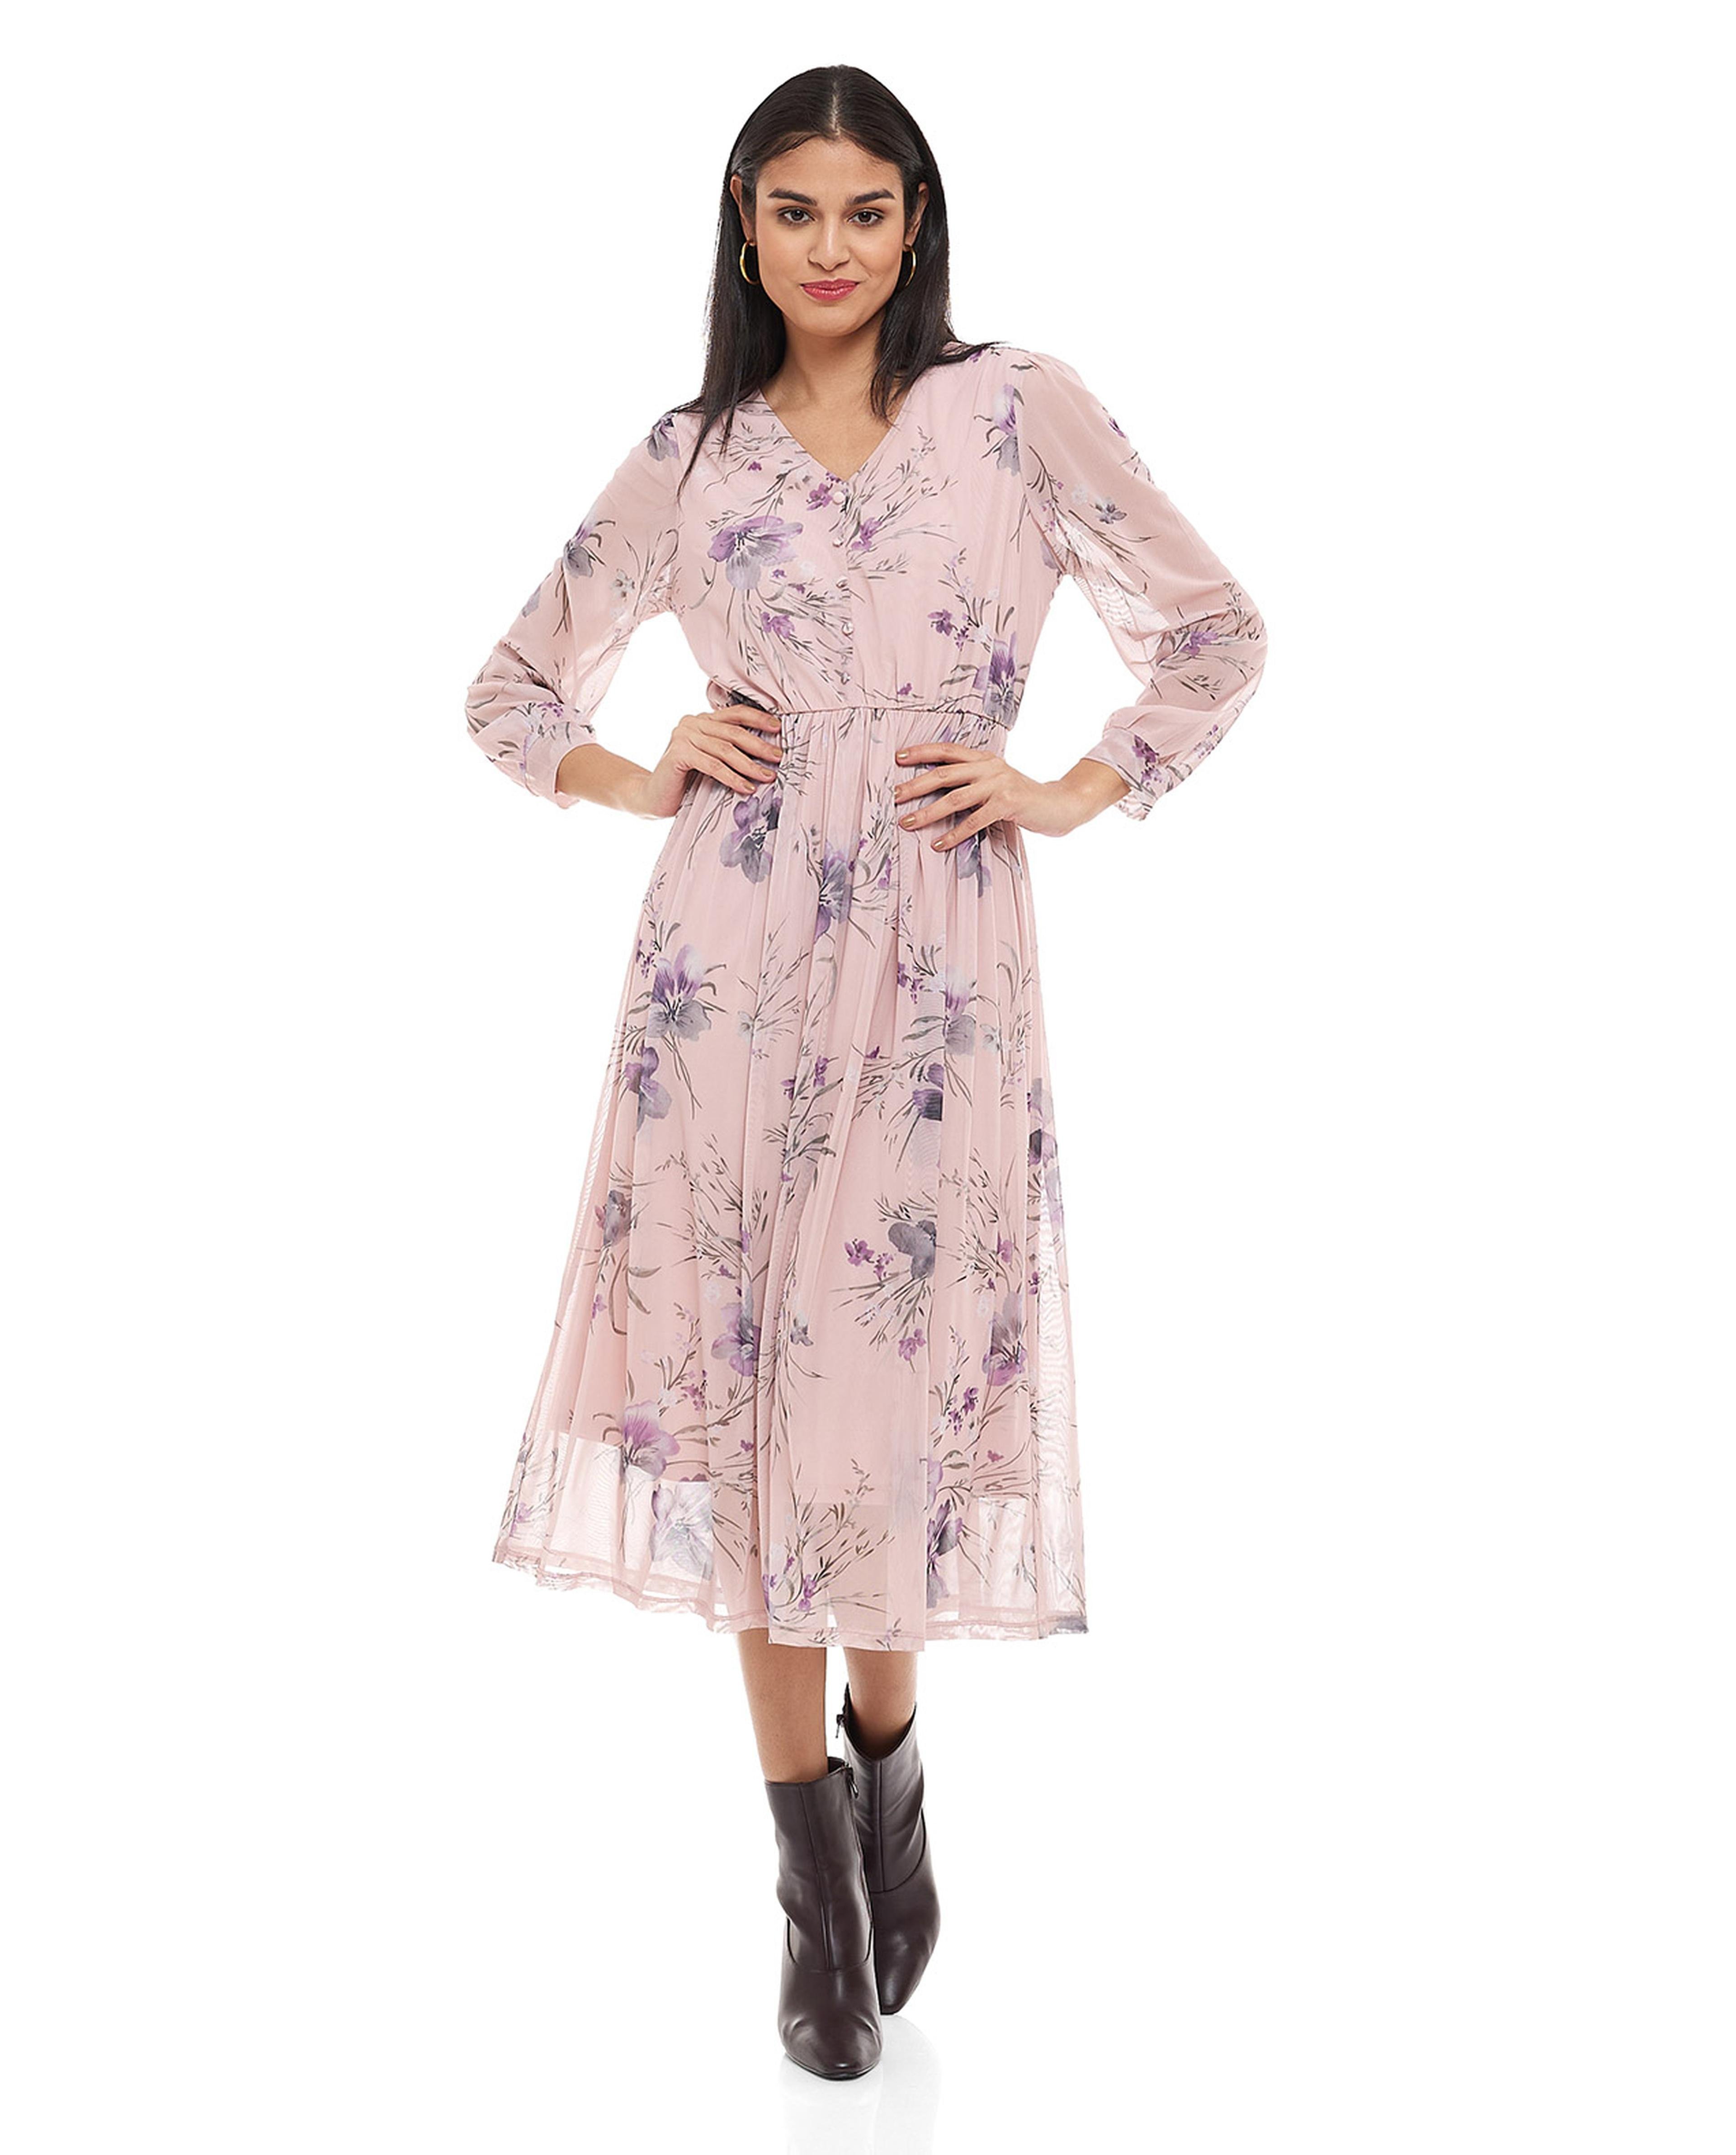 Floral Print Midi Dress with V-Neck and Long Sleeves